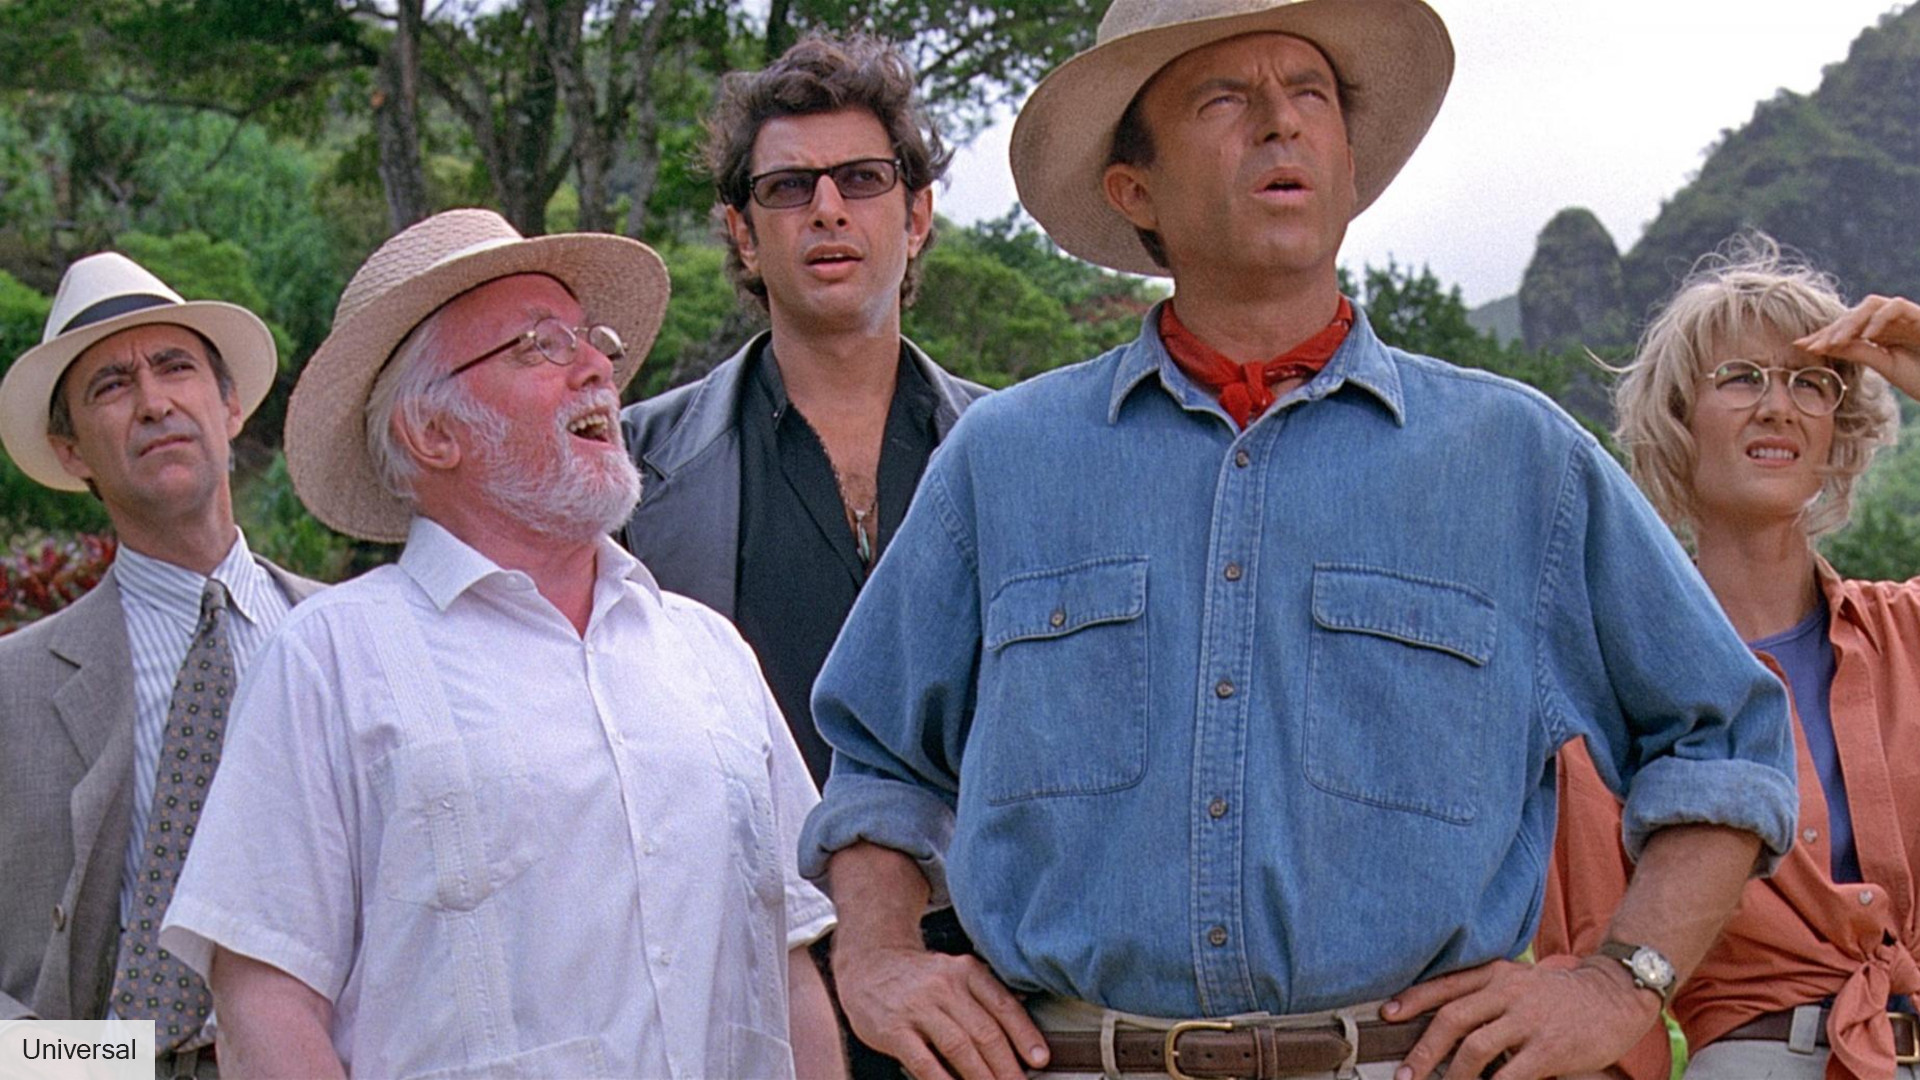 Jurassic Park cast where are the science fiction movie stars now